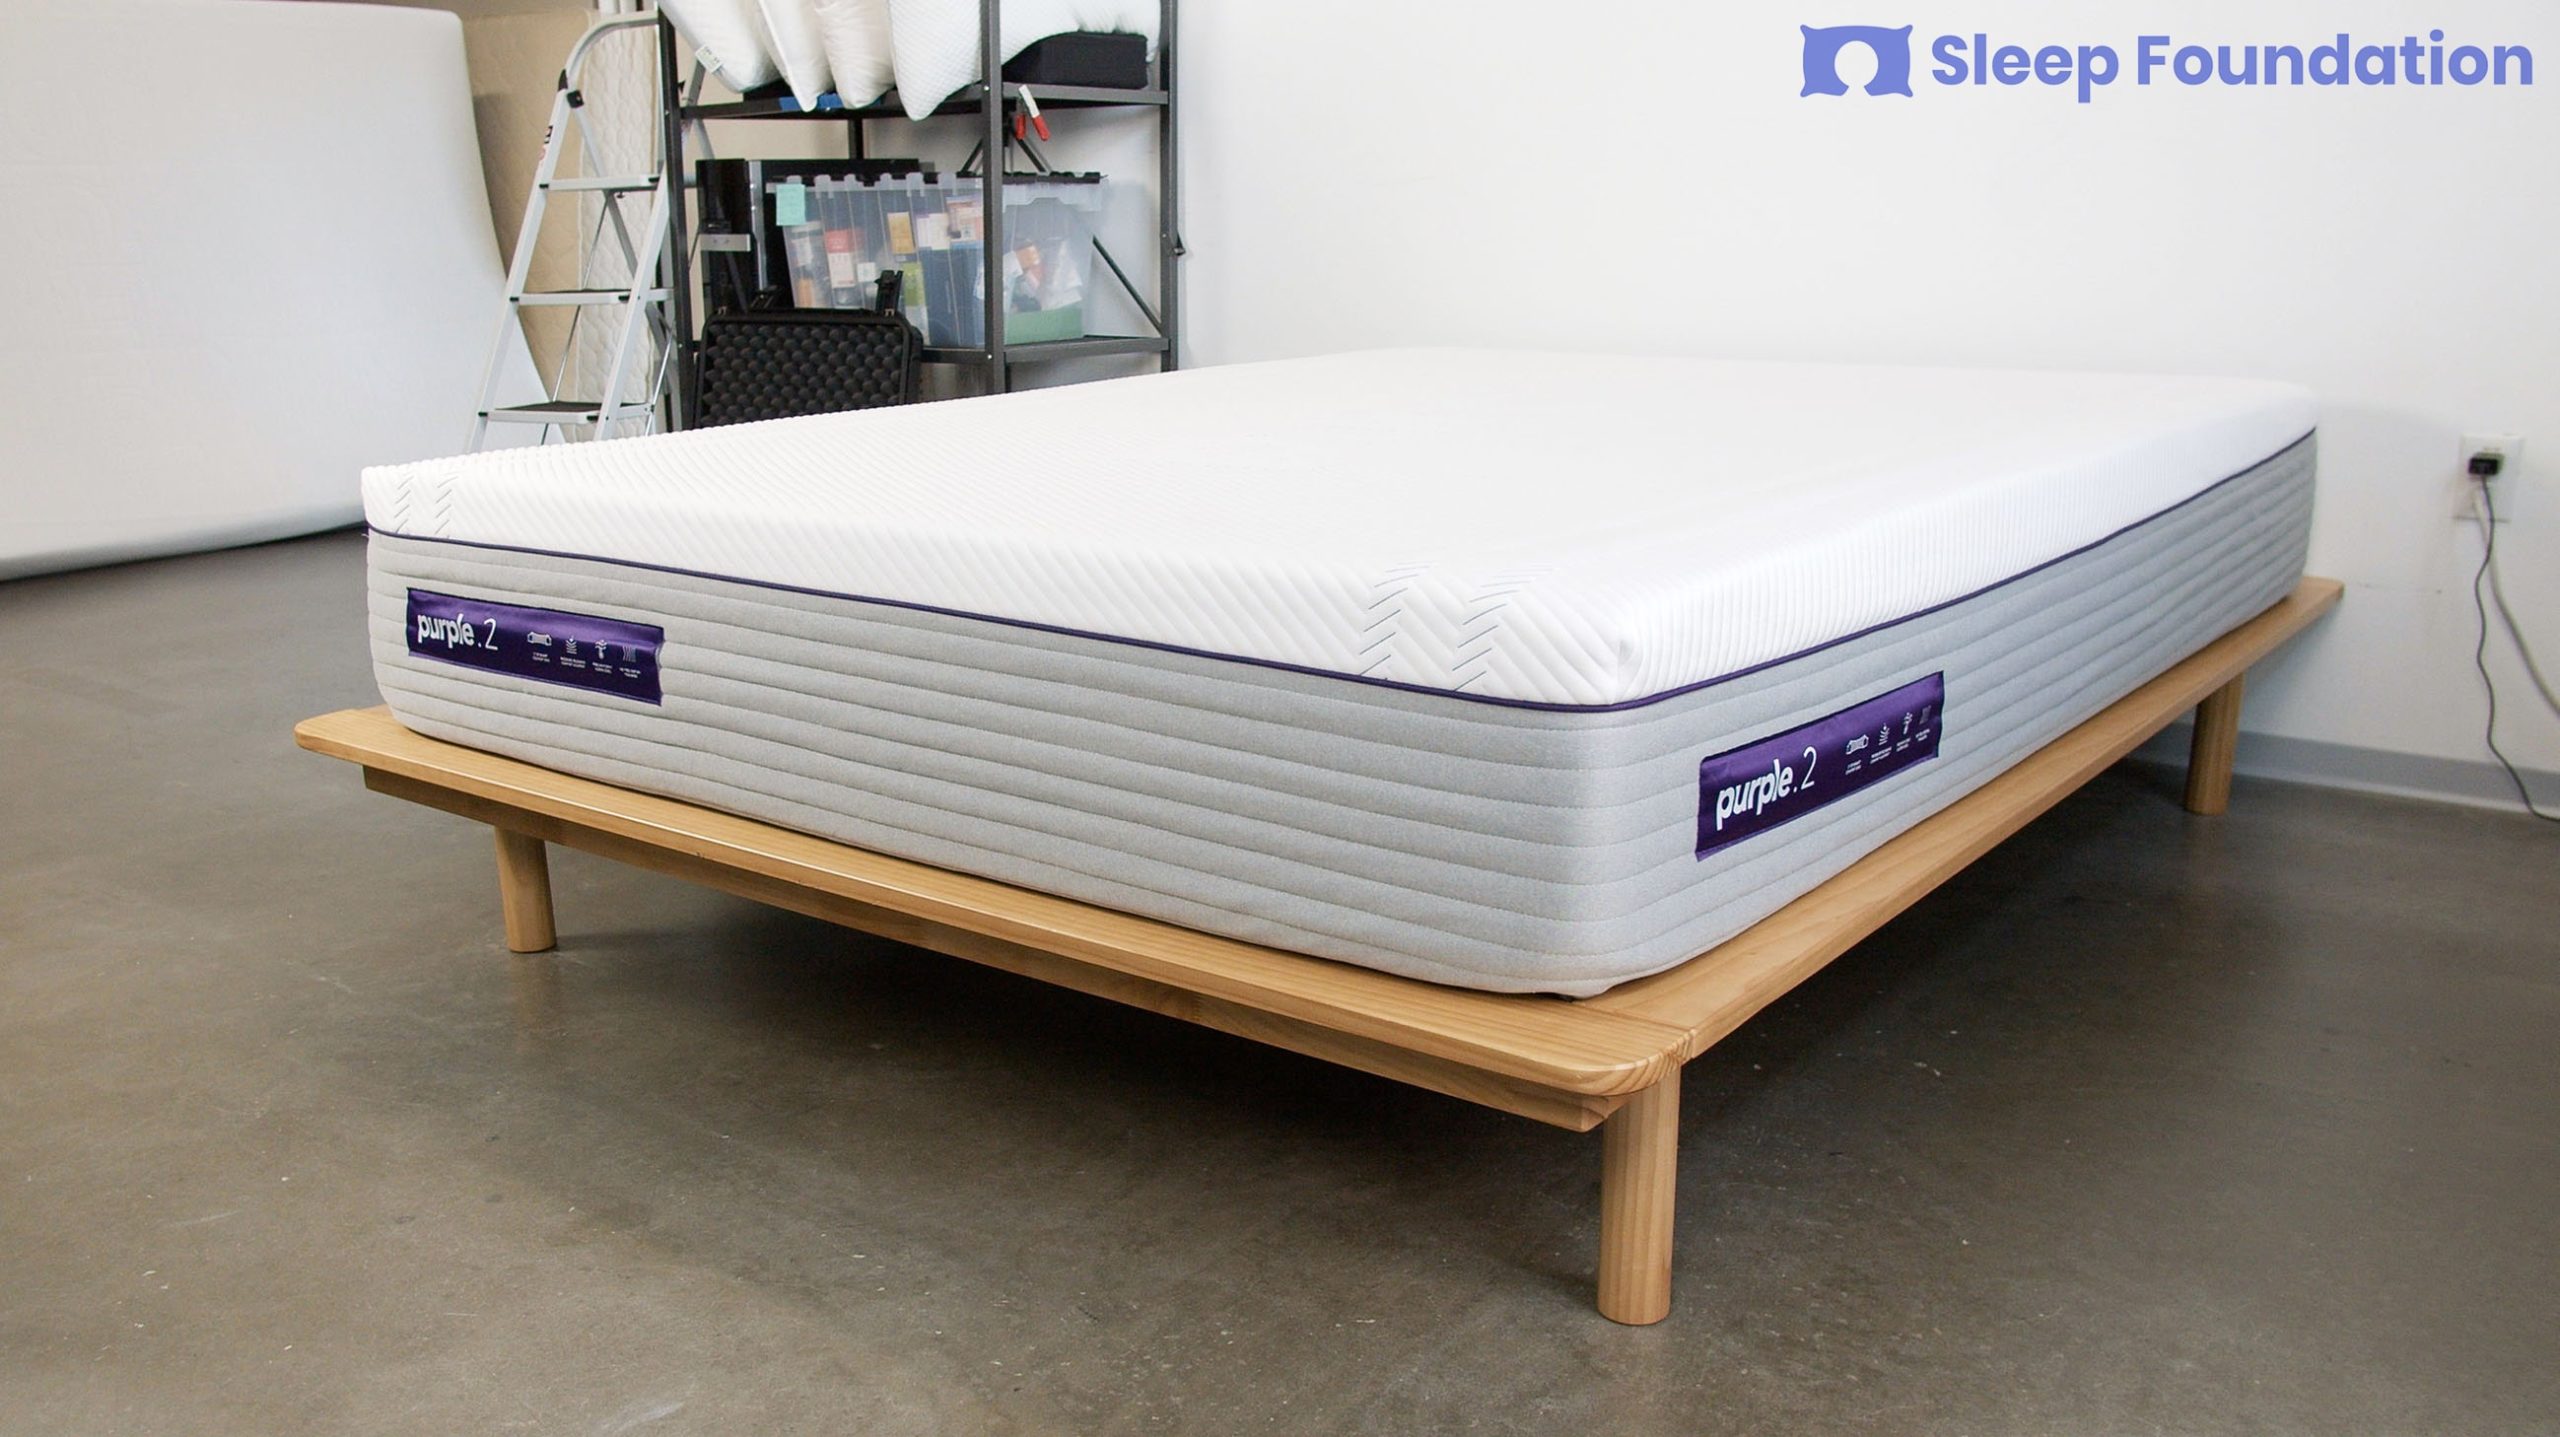 How Long Does A Purple Mattress Take To Fully Expand?